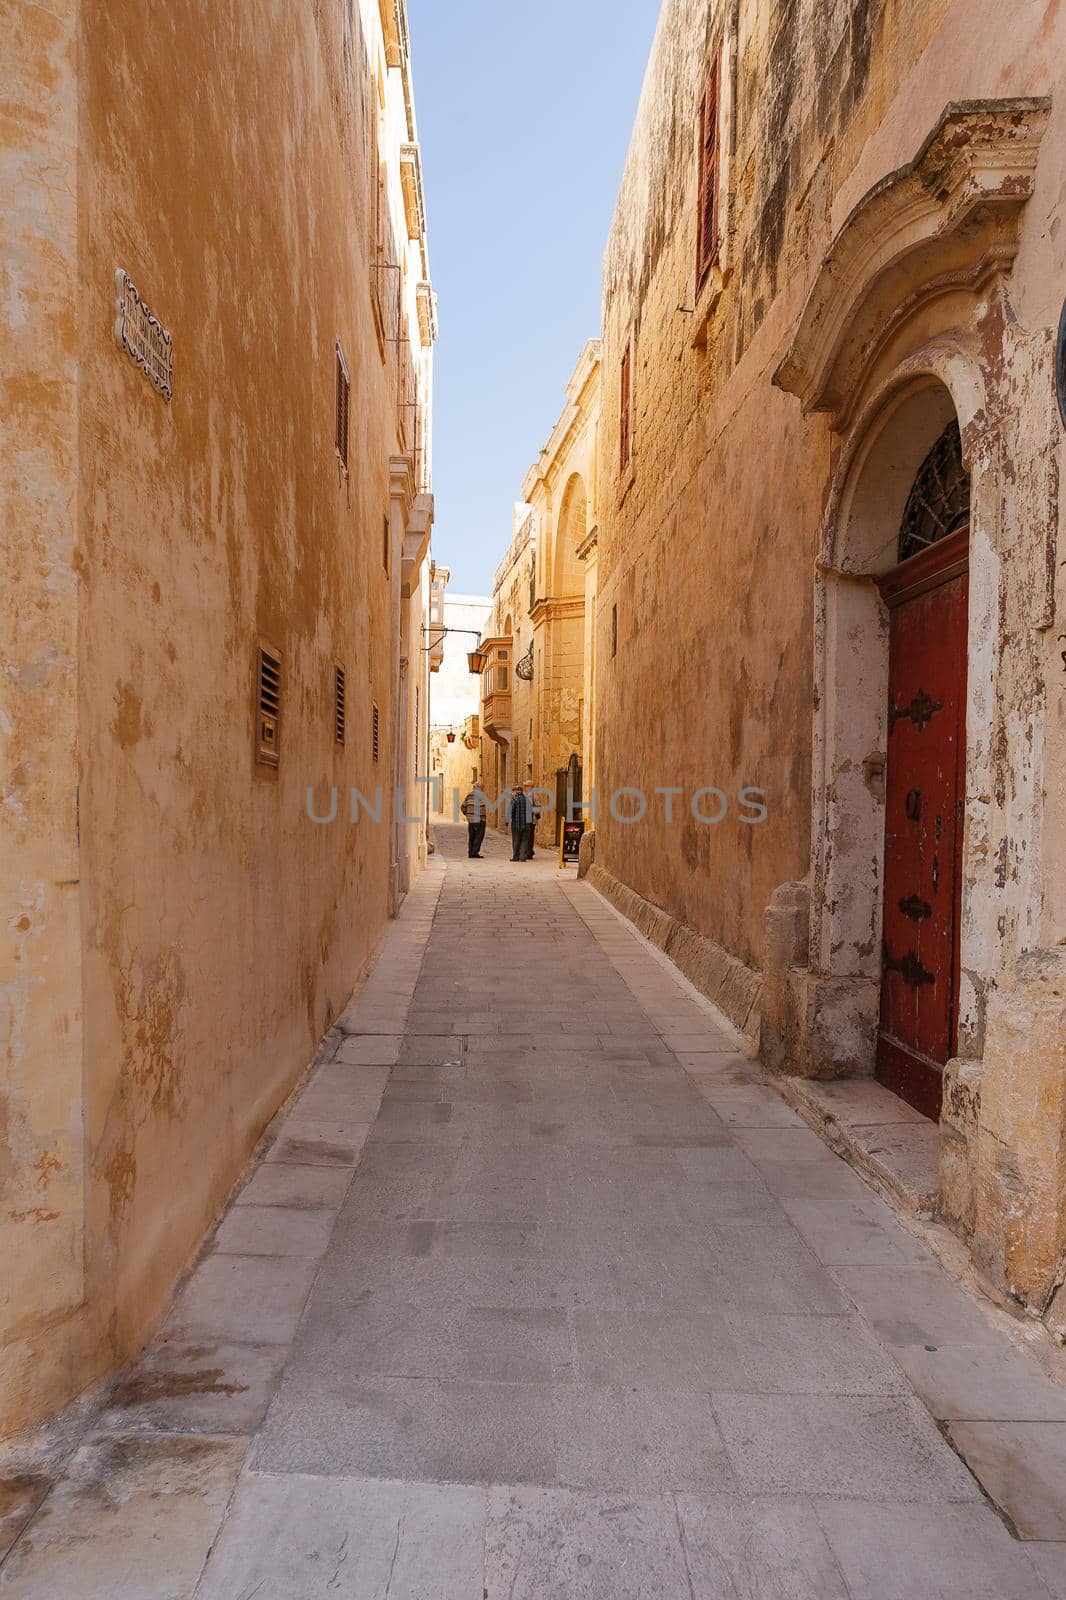 MDINA, MALTA - February 18, 2010. Local old men on narrow street of Mdina, old capital of Malta. Stone buildings with old fashioned doors and balconies.